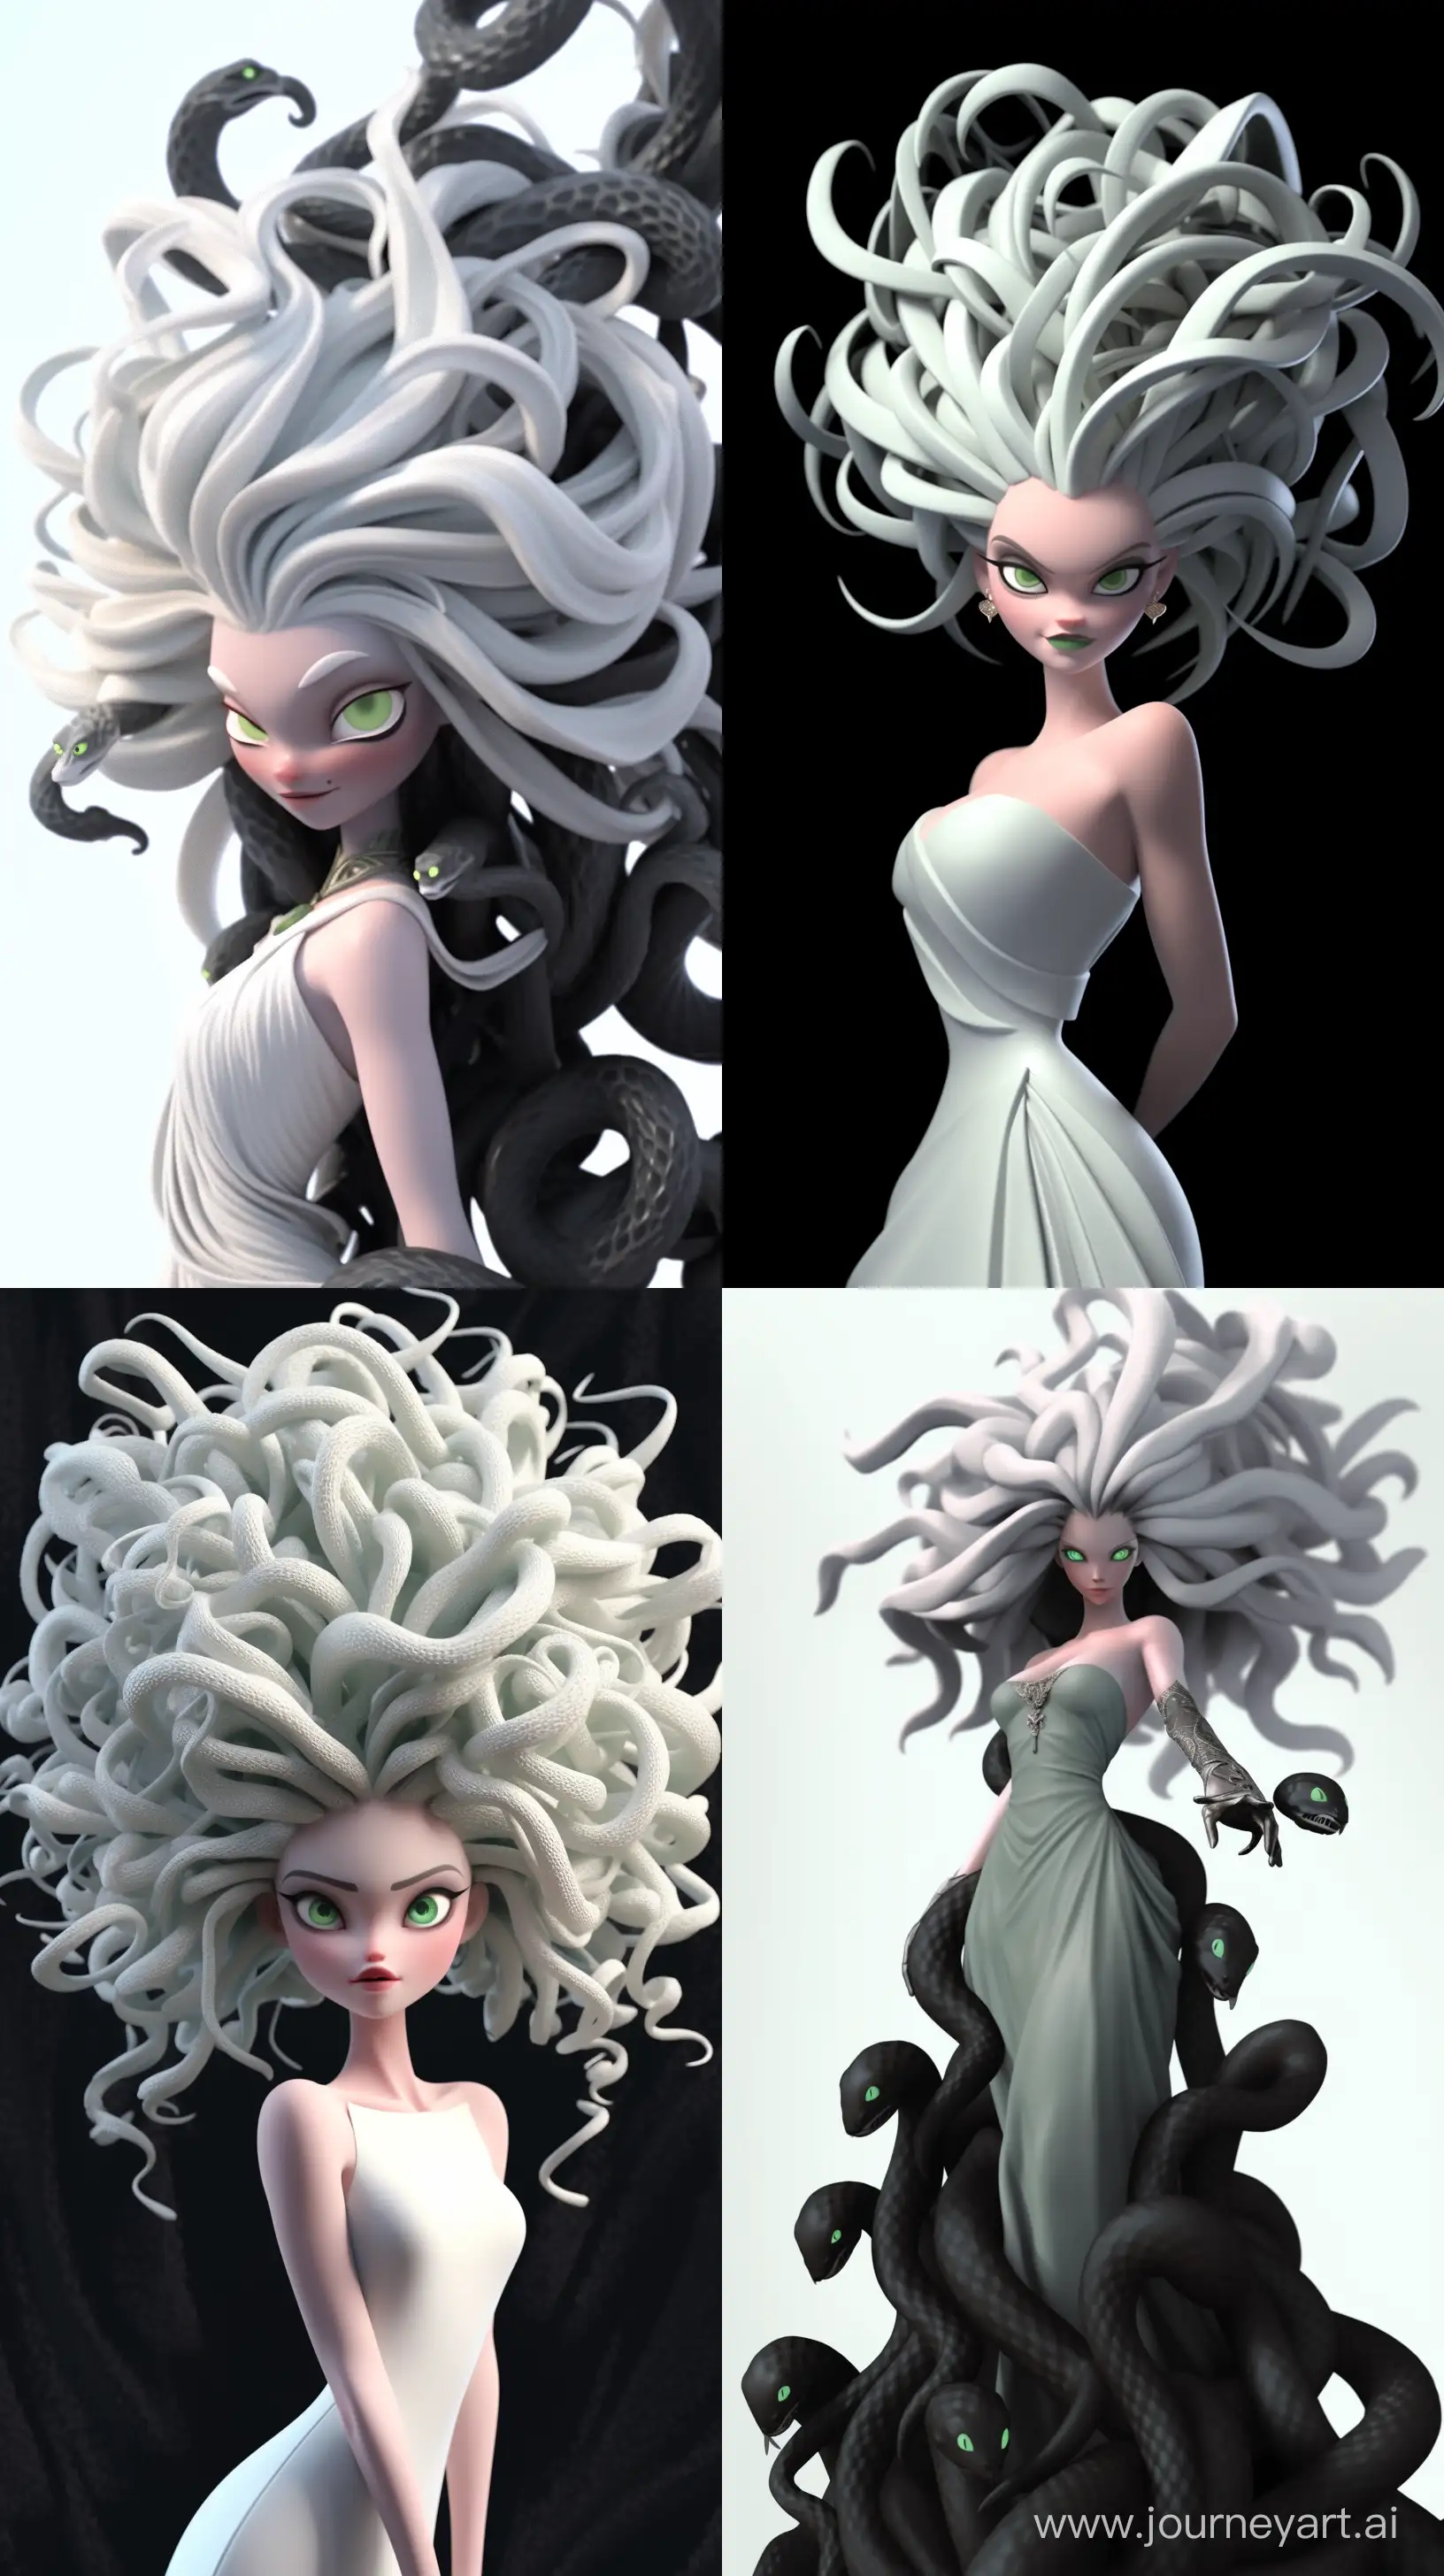 Seductive-Medusa-Empowering-3D-Animation-in-Green-White-and-Black